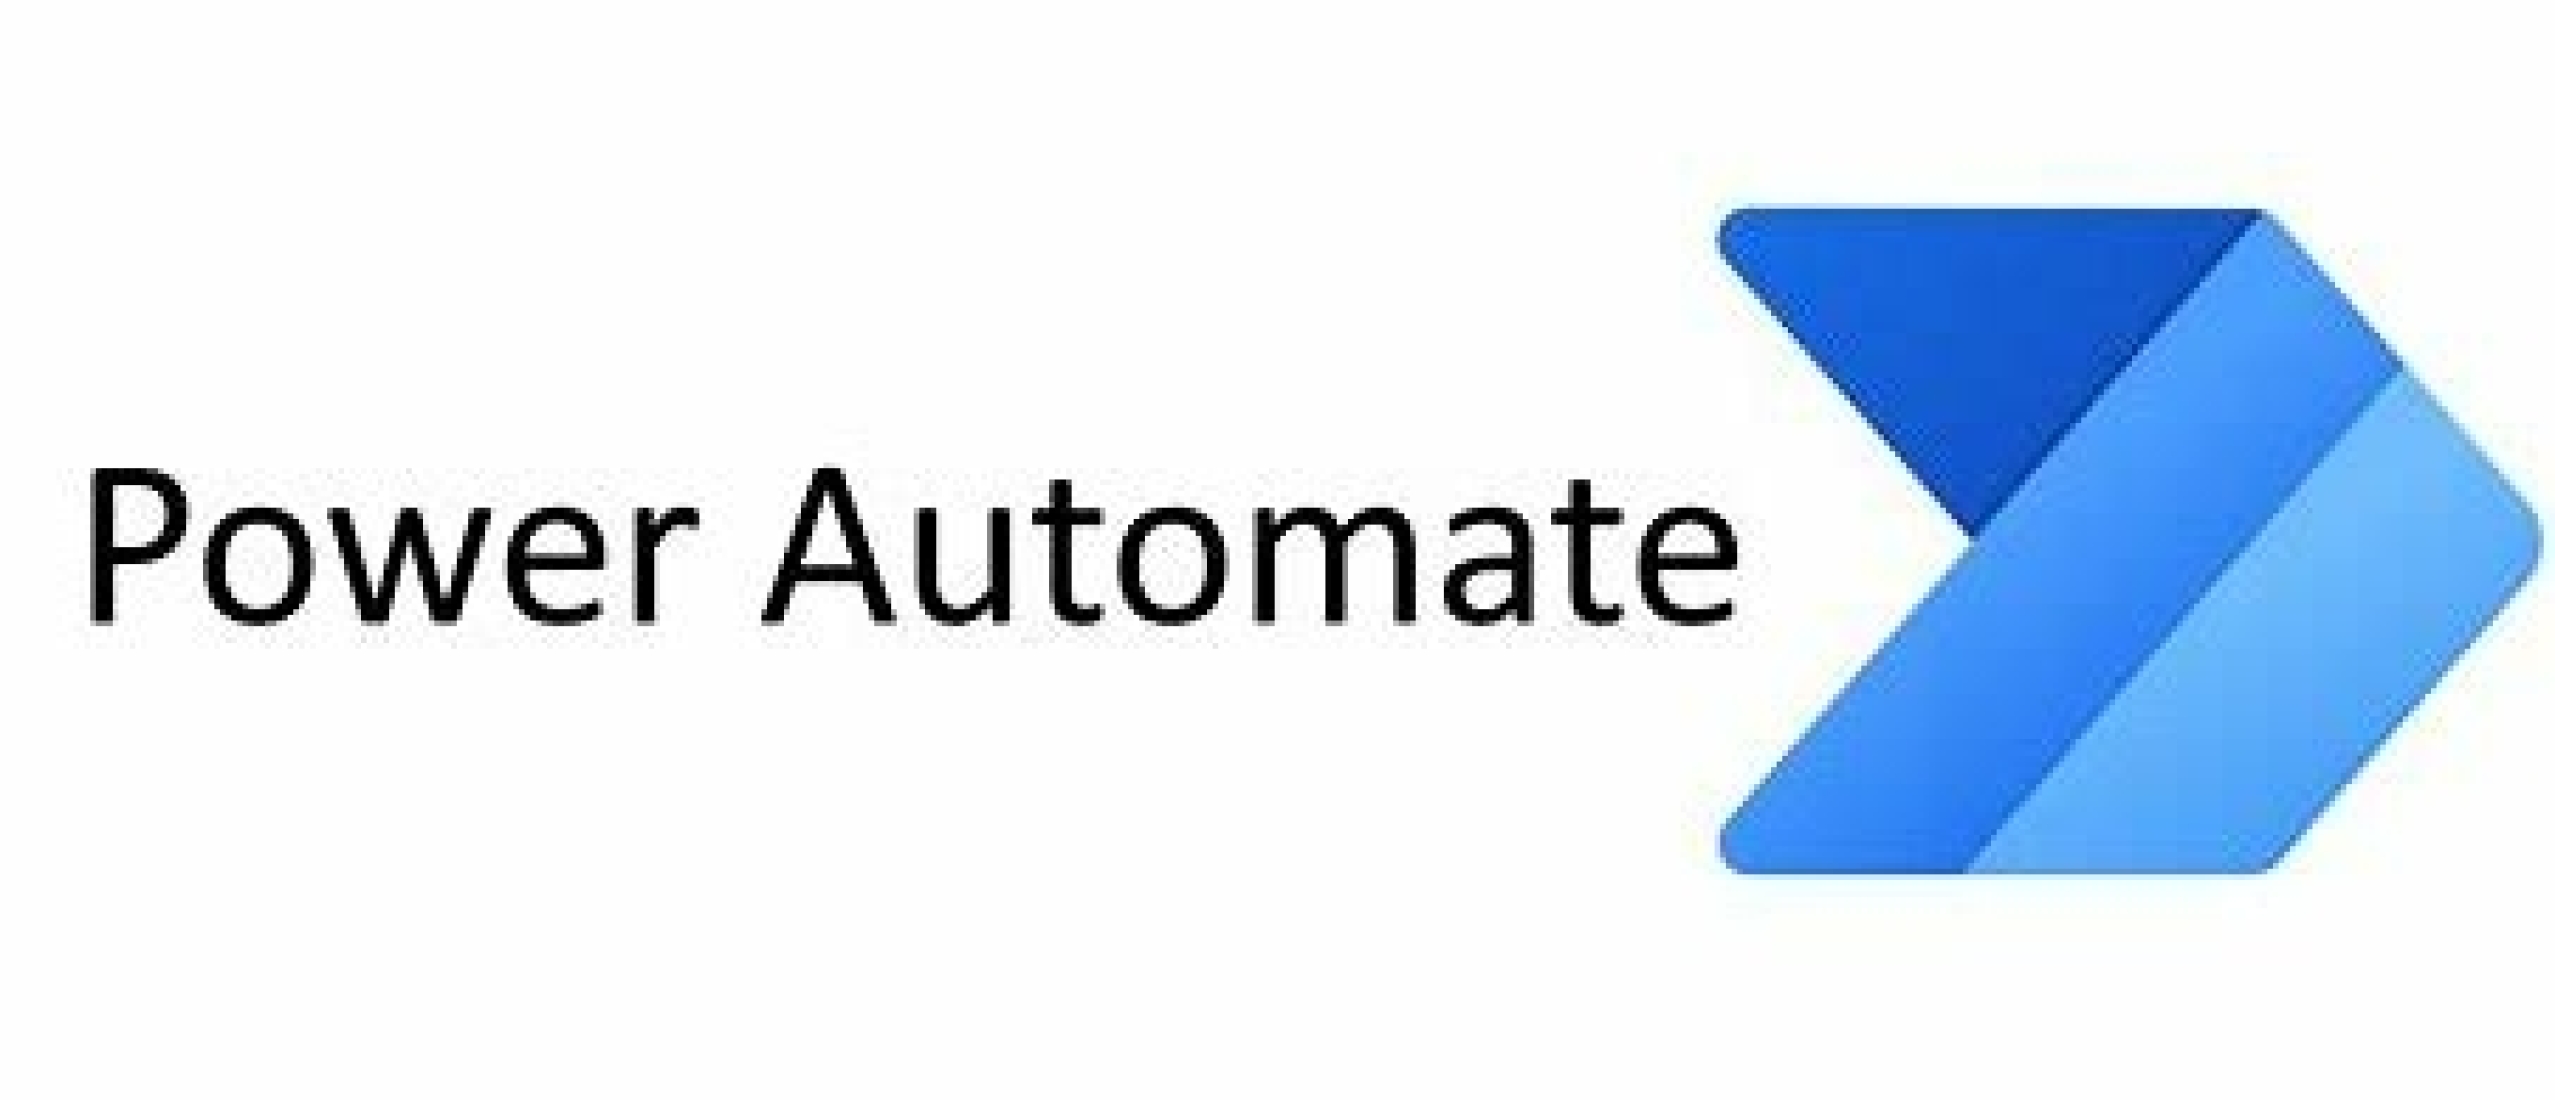 Power Automate